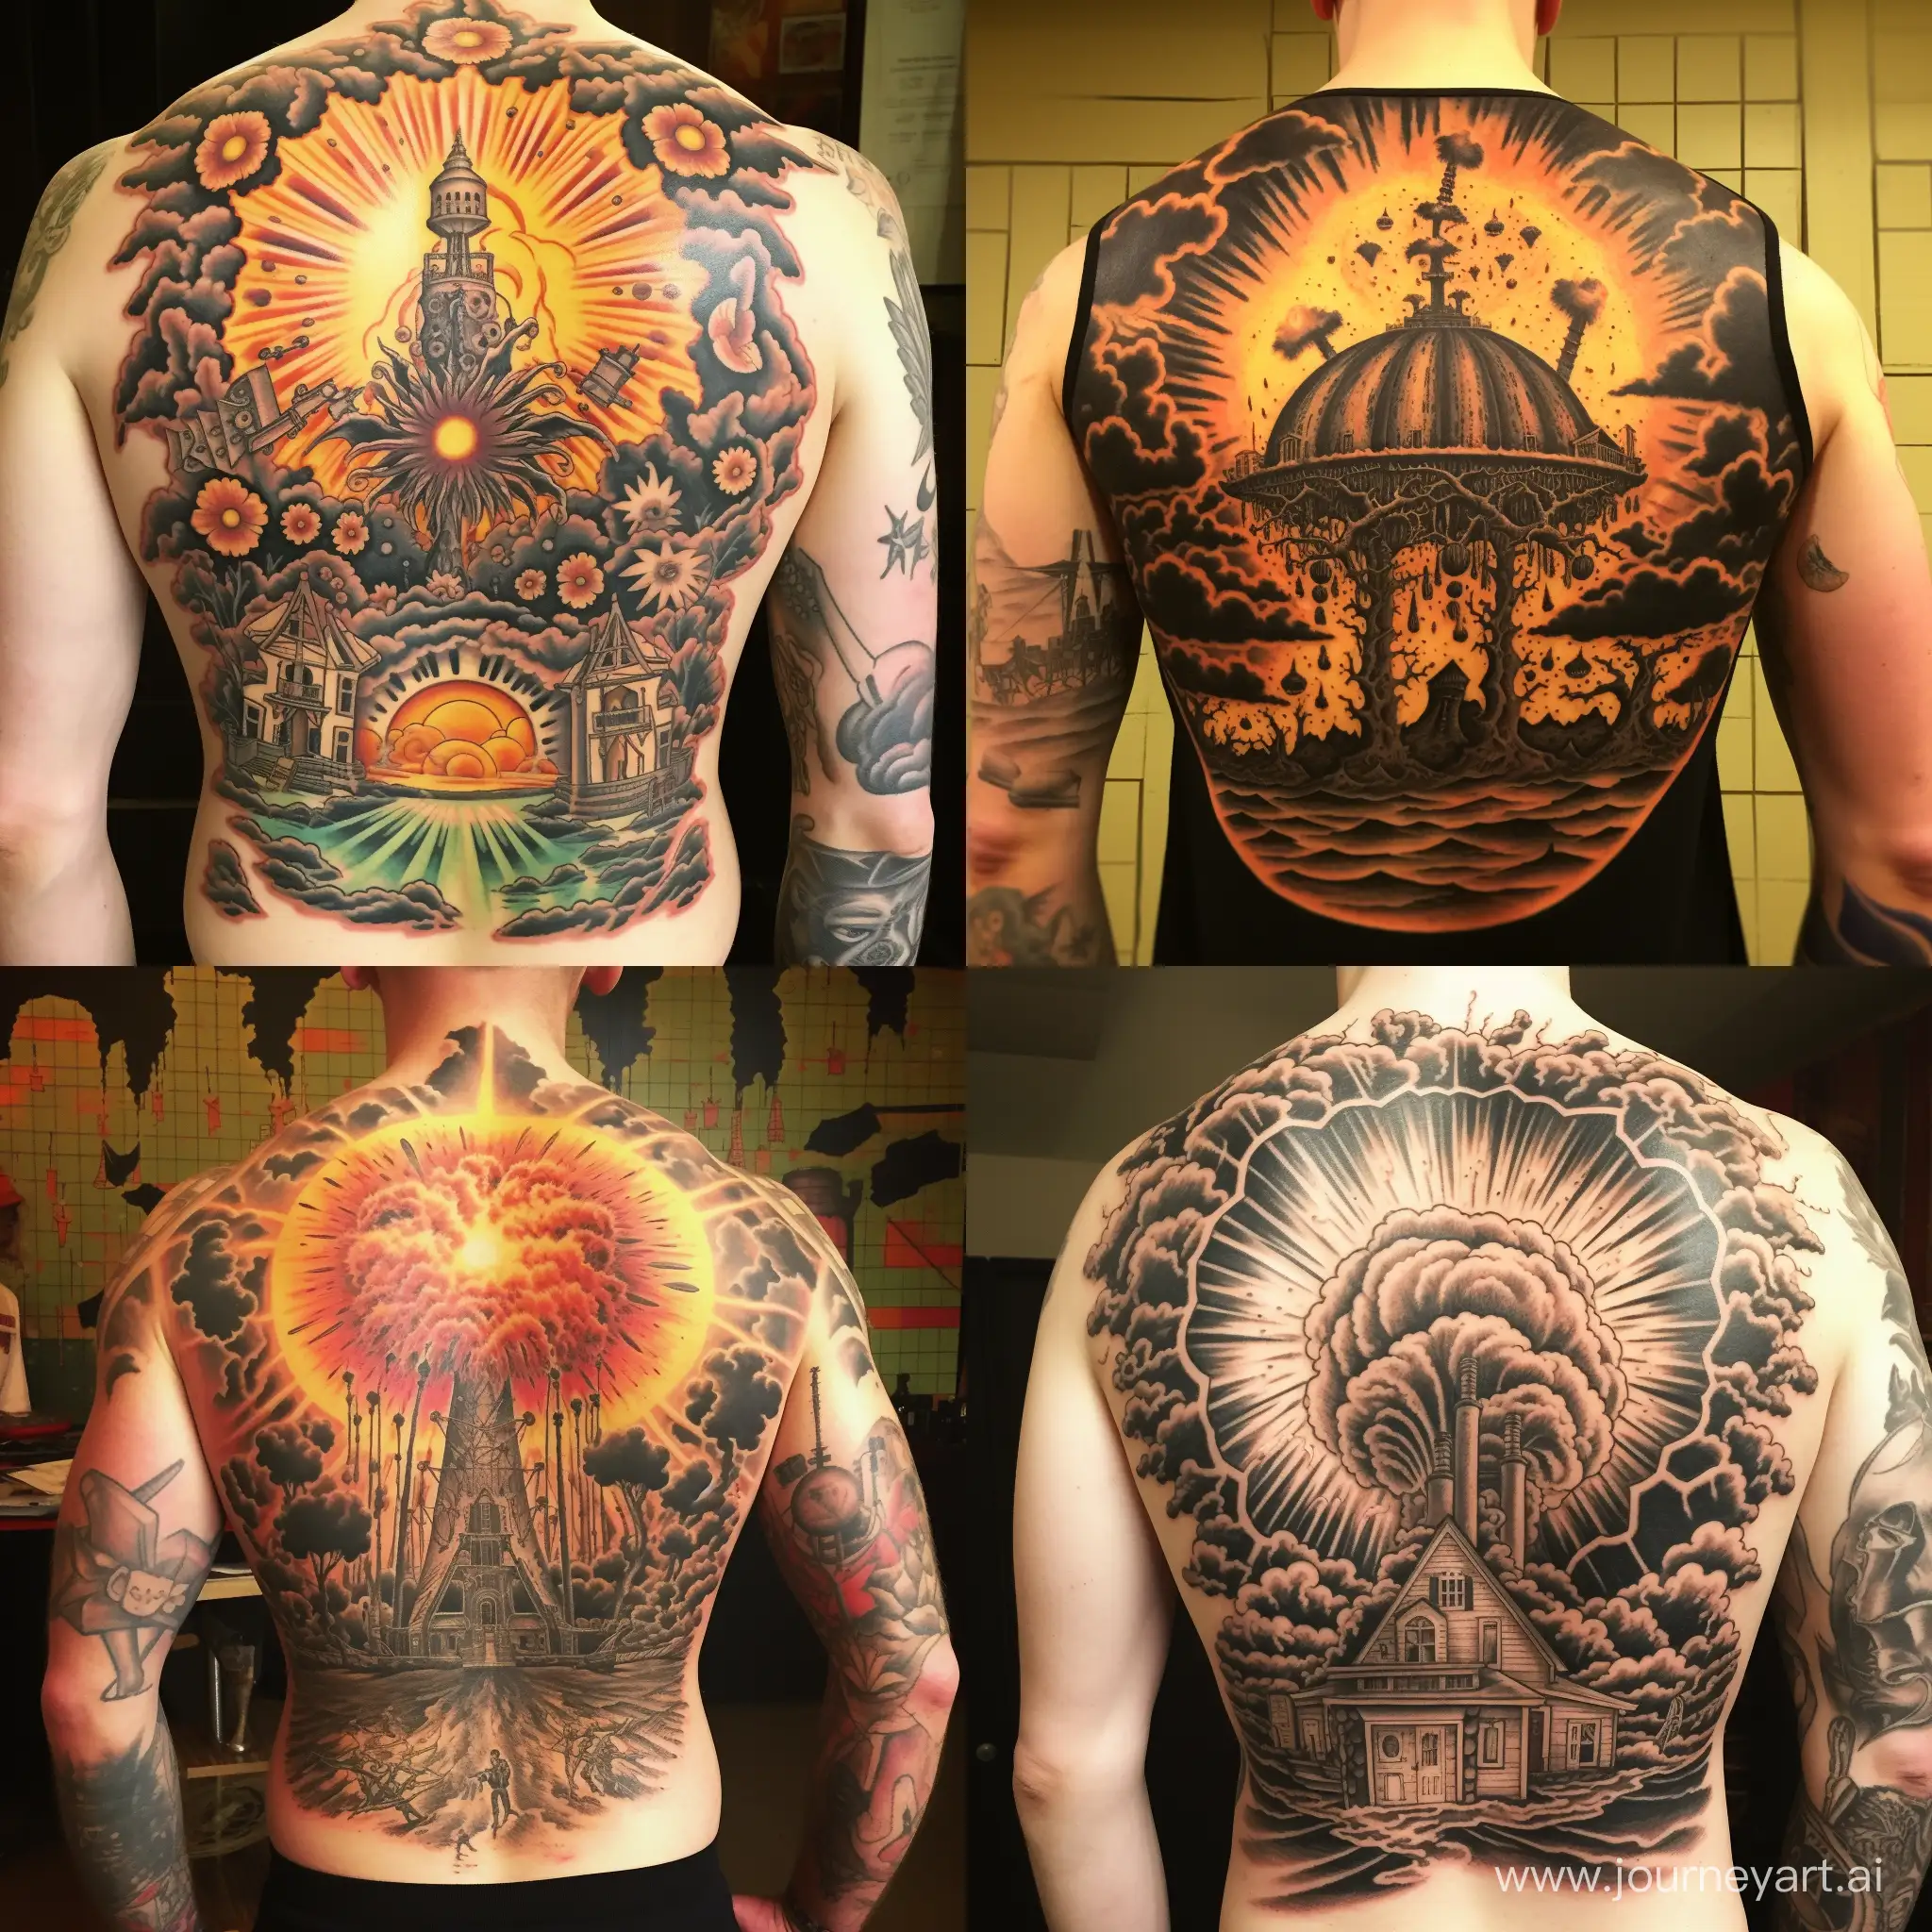 Devastating-Nuclear-Explosion-Decimates-1940s-American-Traditional-Tattoo-Colony